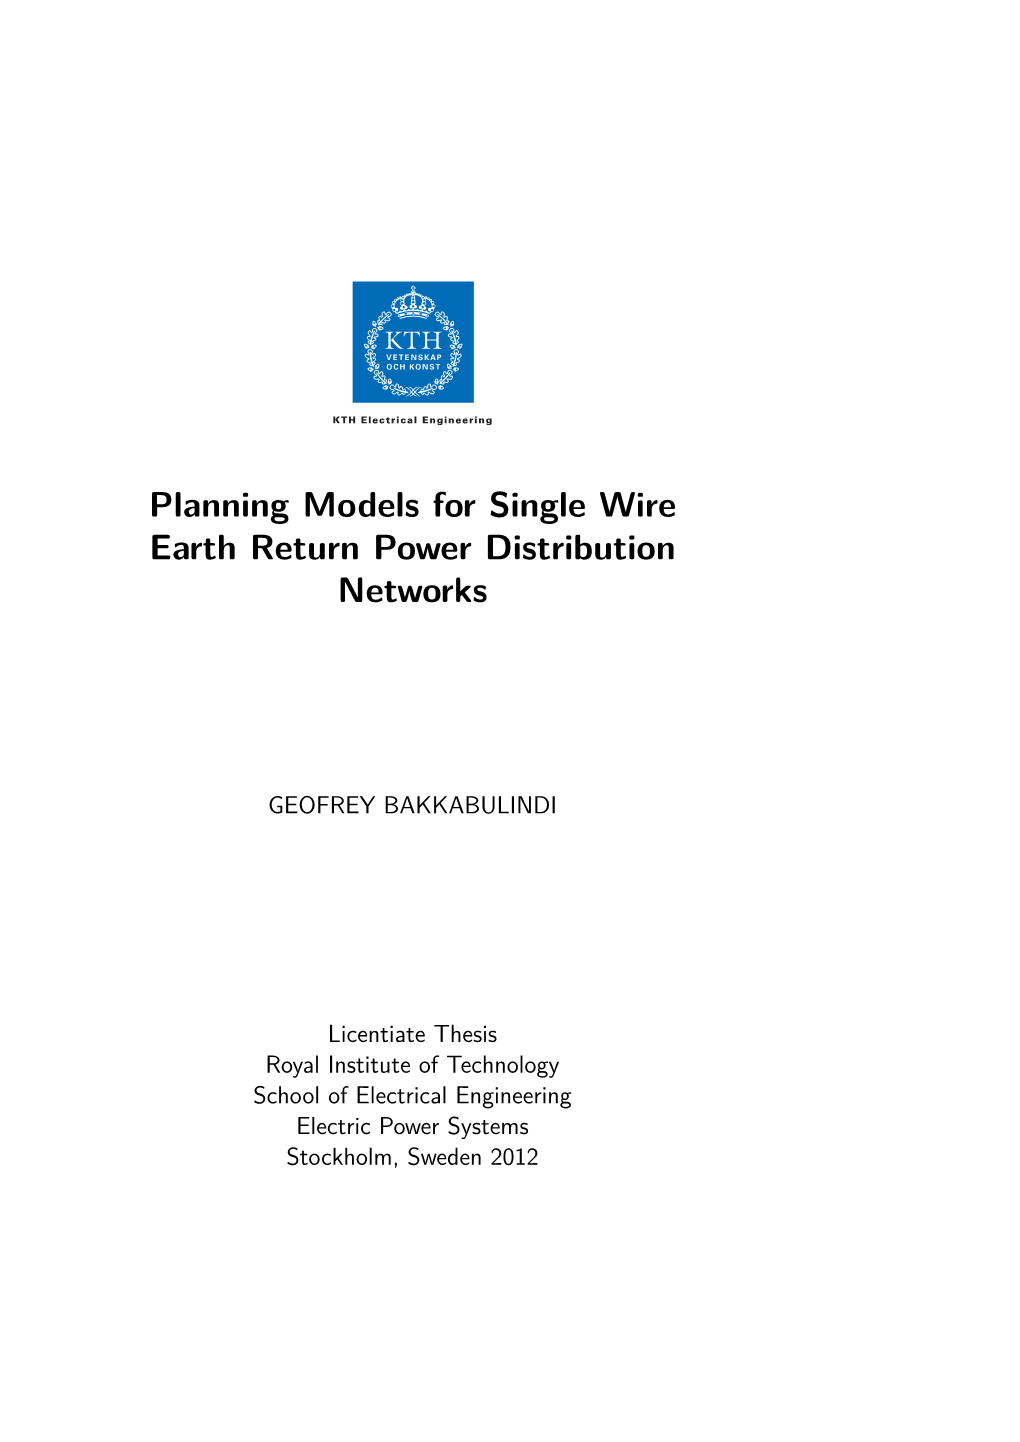 Planning Models for Single Wire Earth Return Power Distribution Networks